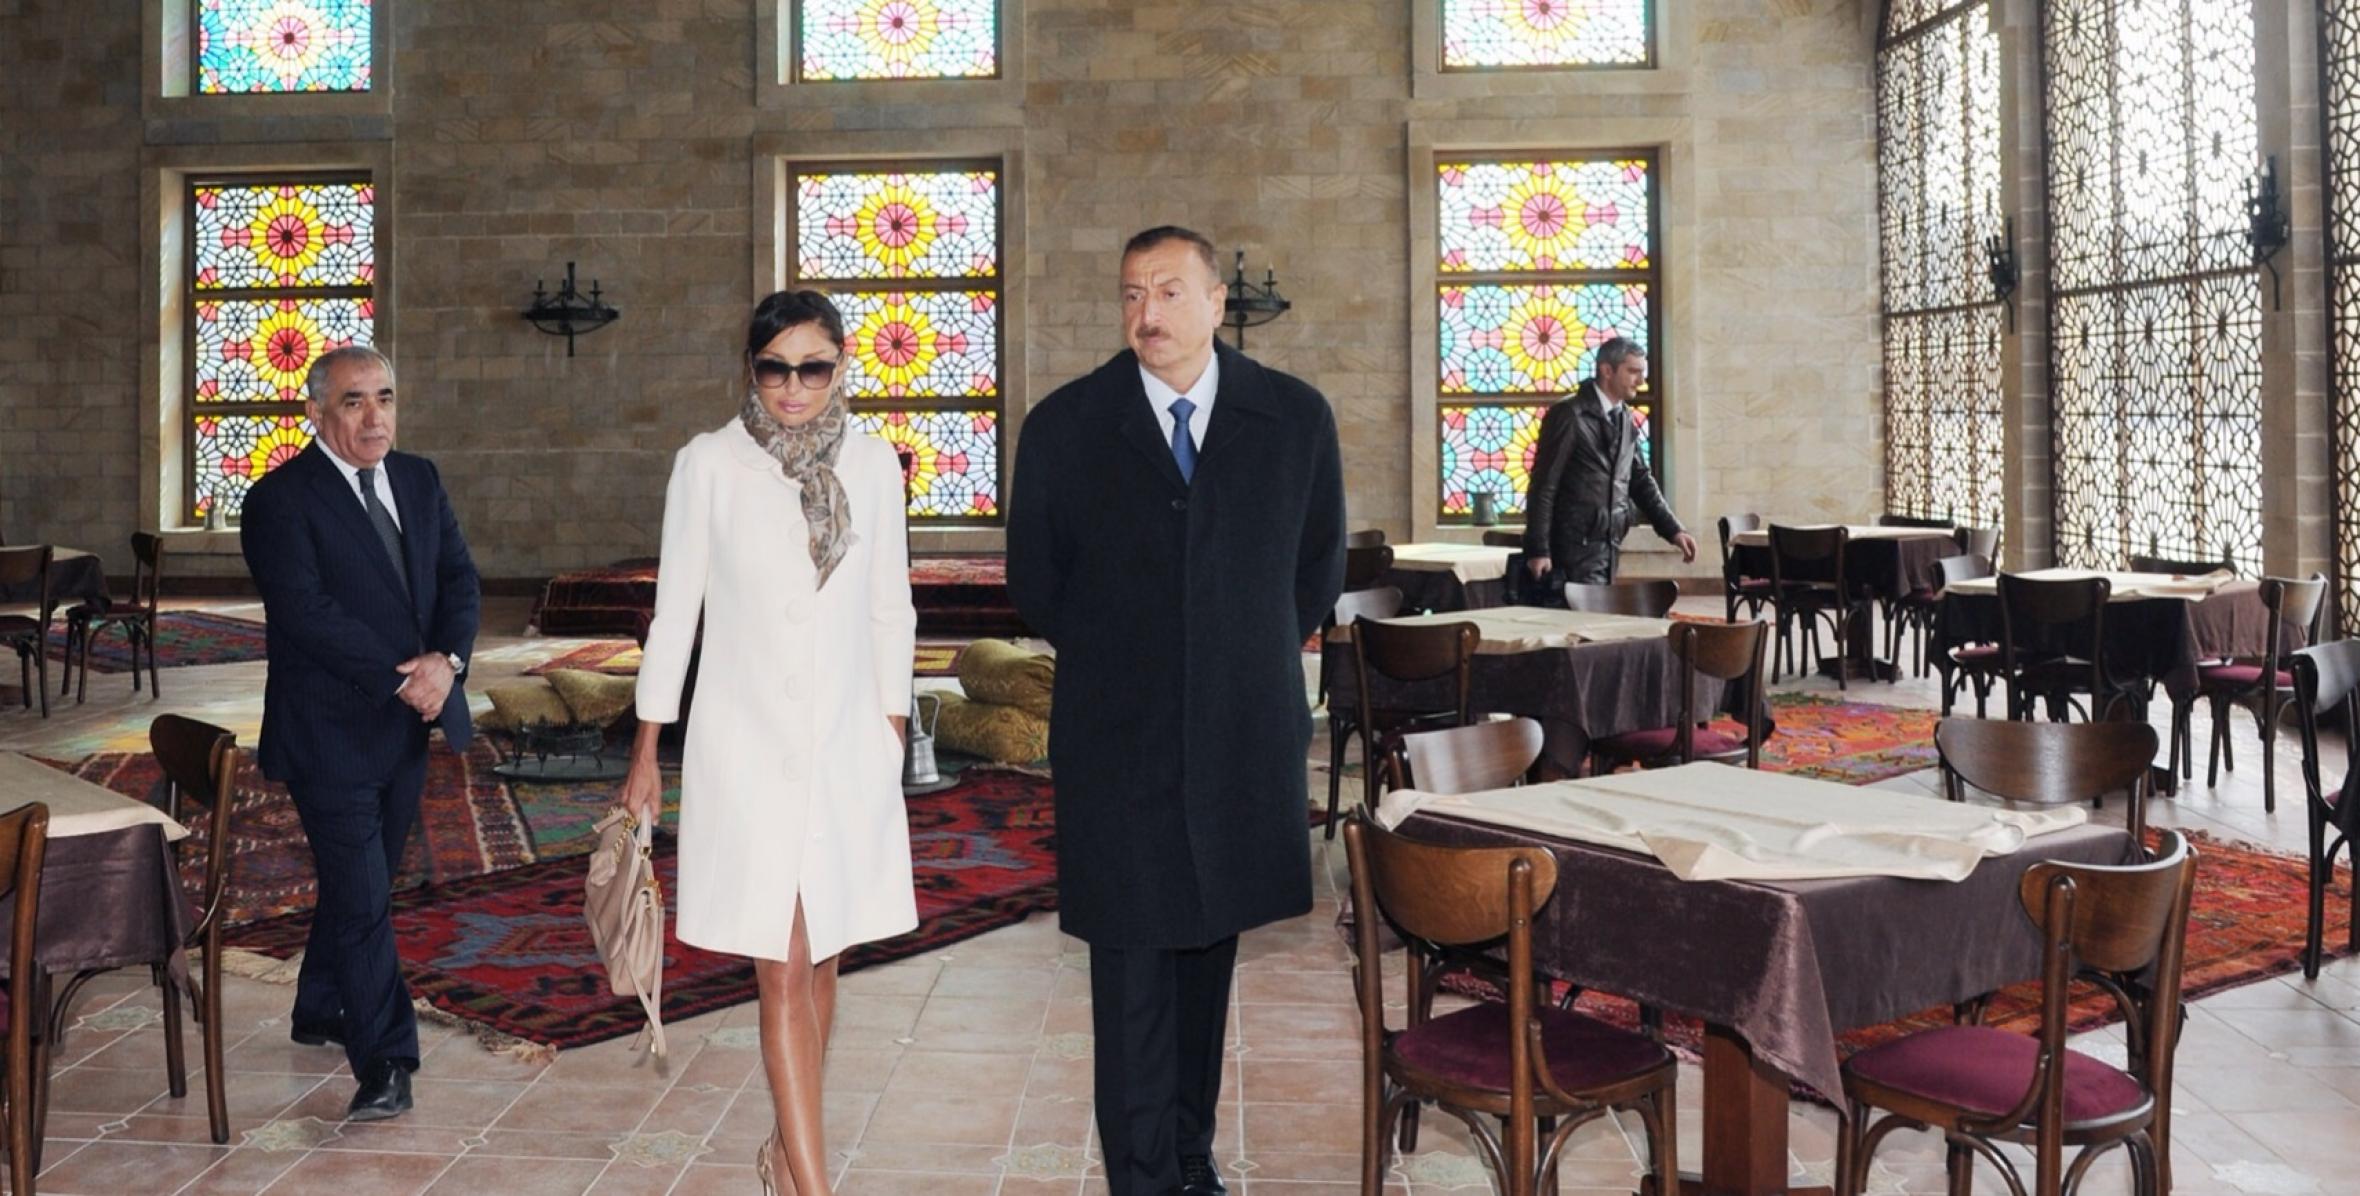 Ilham Aliyev reviewed the State Historical and Architectural Reserve “Atashgah Temple” after restoration and reconstruction